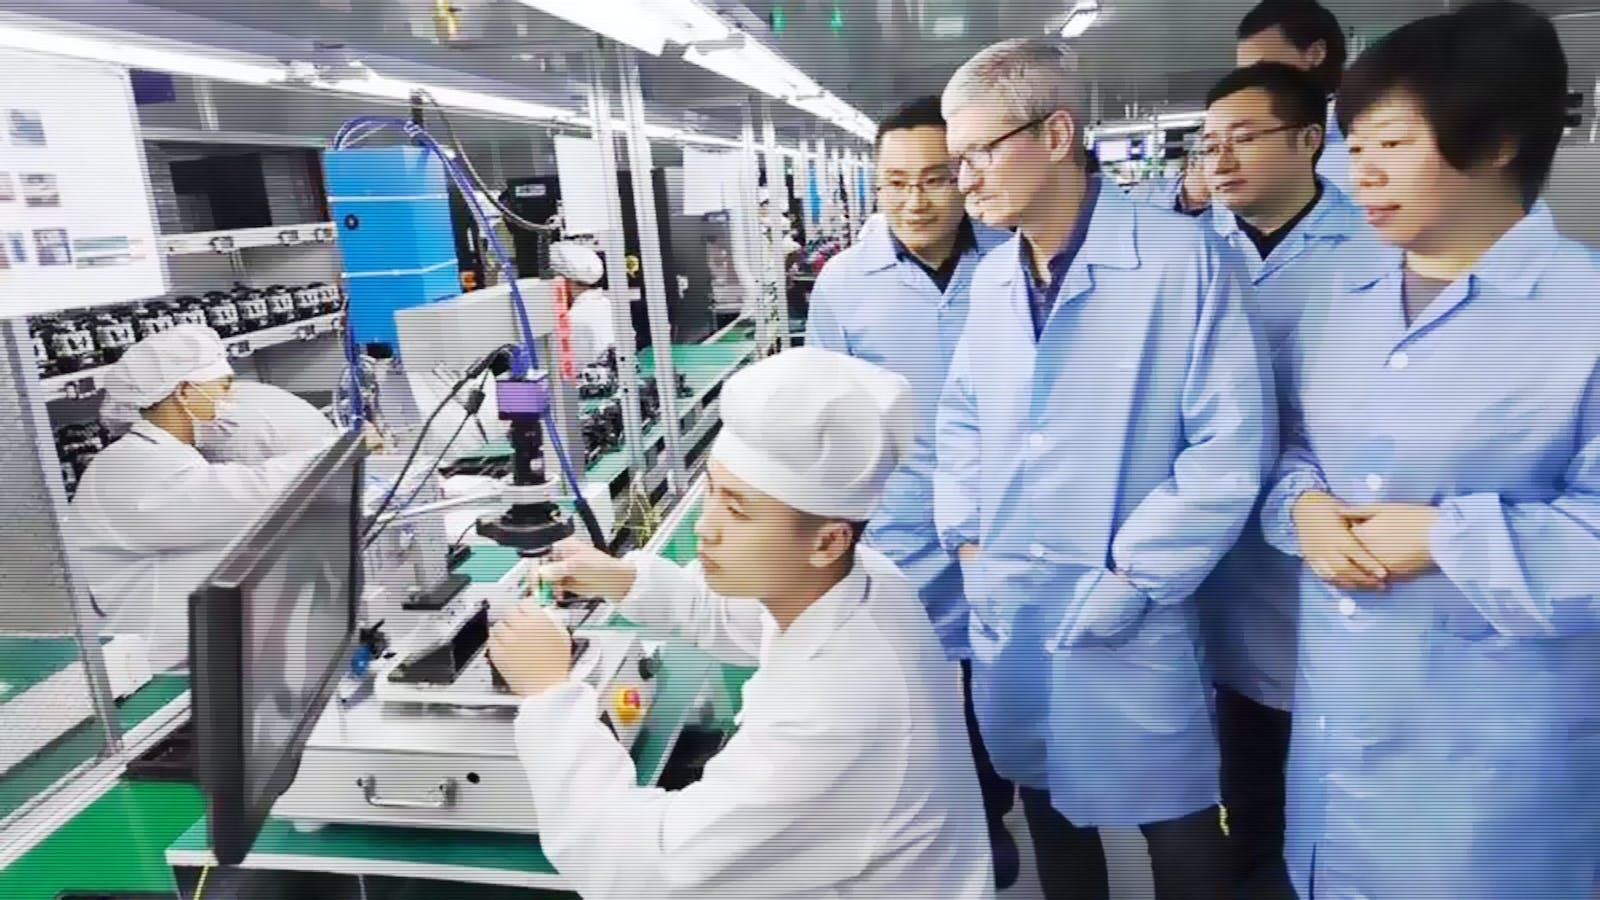 Apple CEO Tim Cook inspecting Apple Products Manufacturing